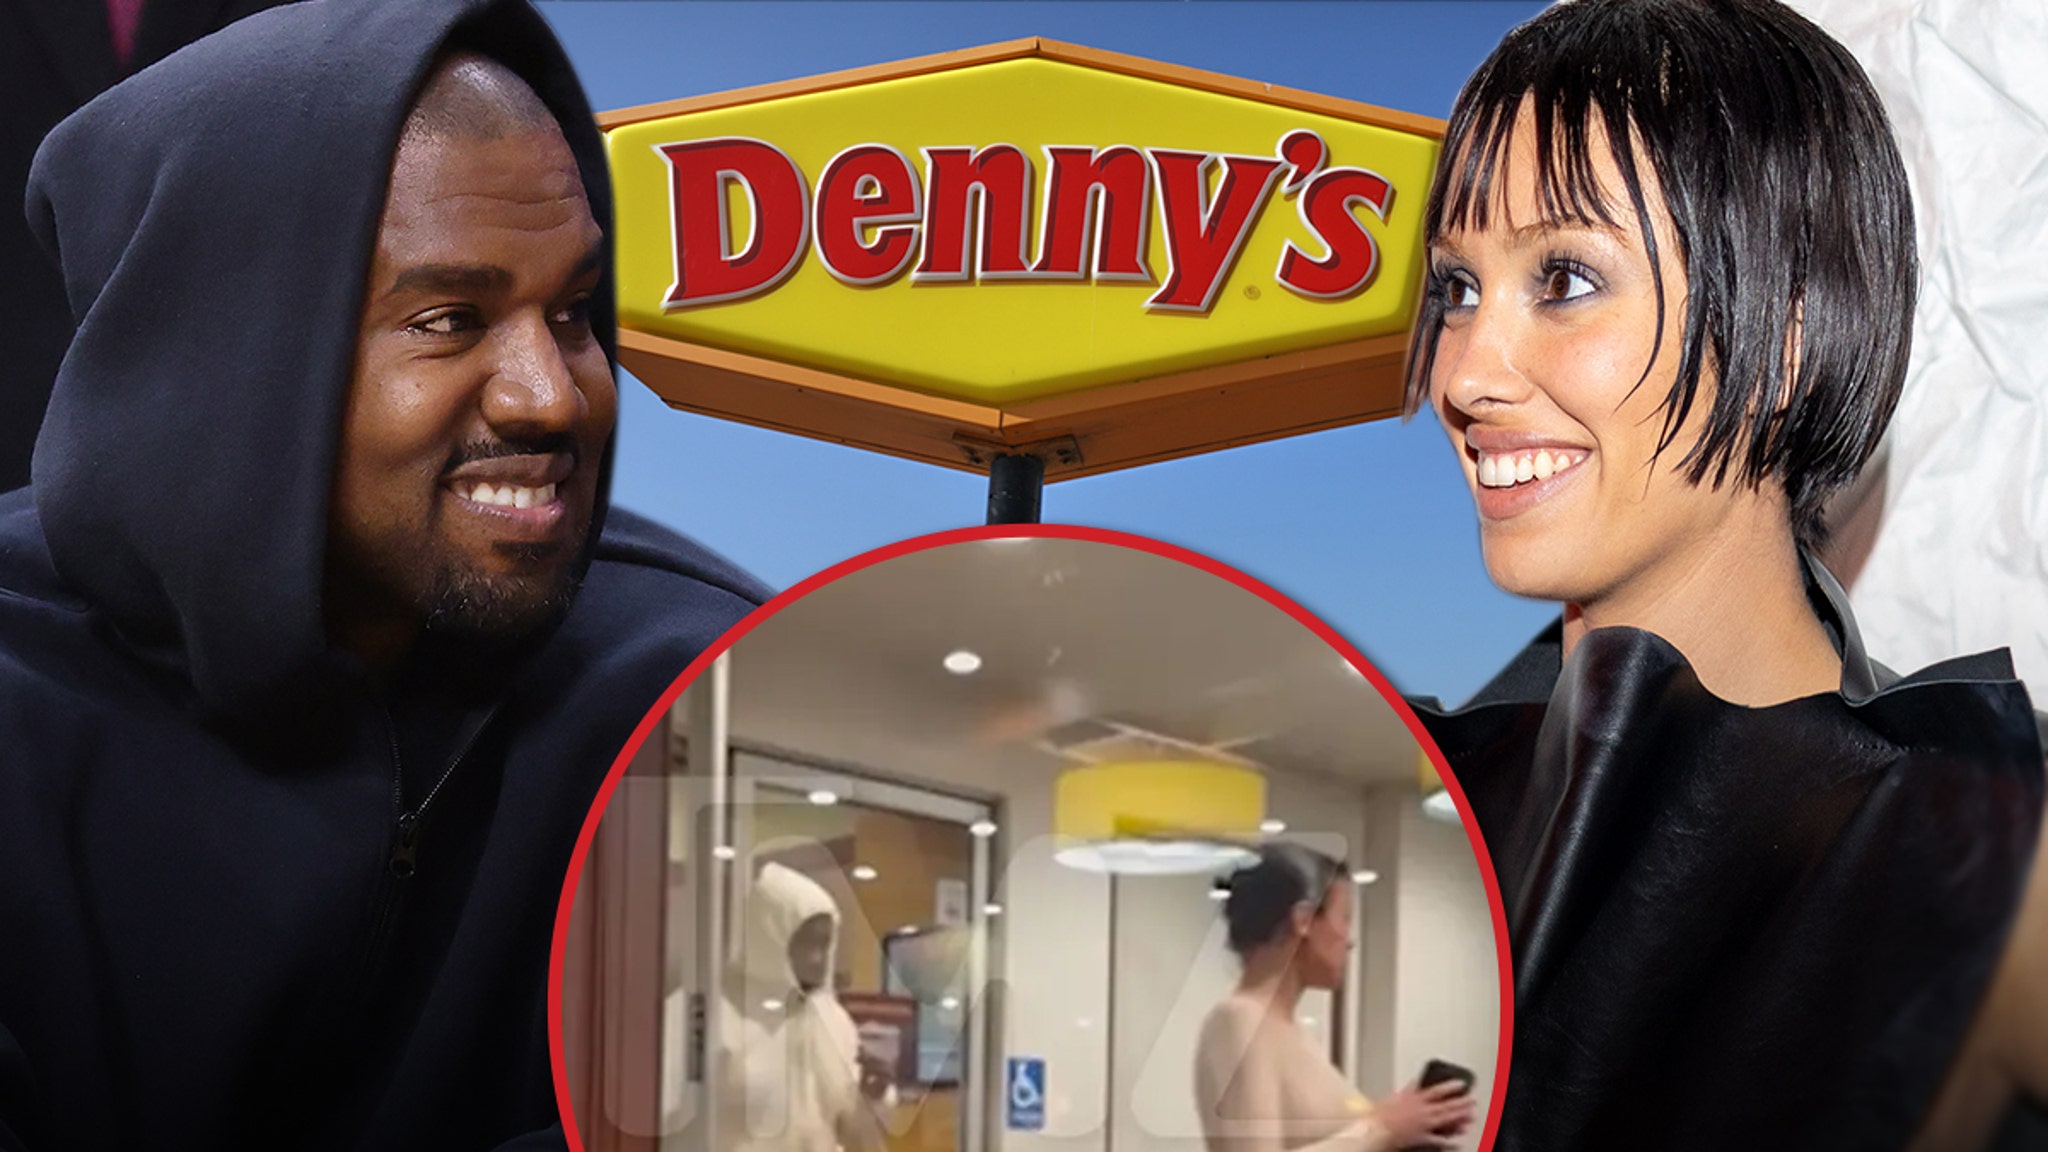 Kanye West and Bianca Censori dine at Denny's amid big Yeezy changes